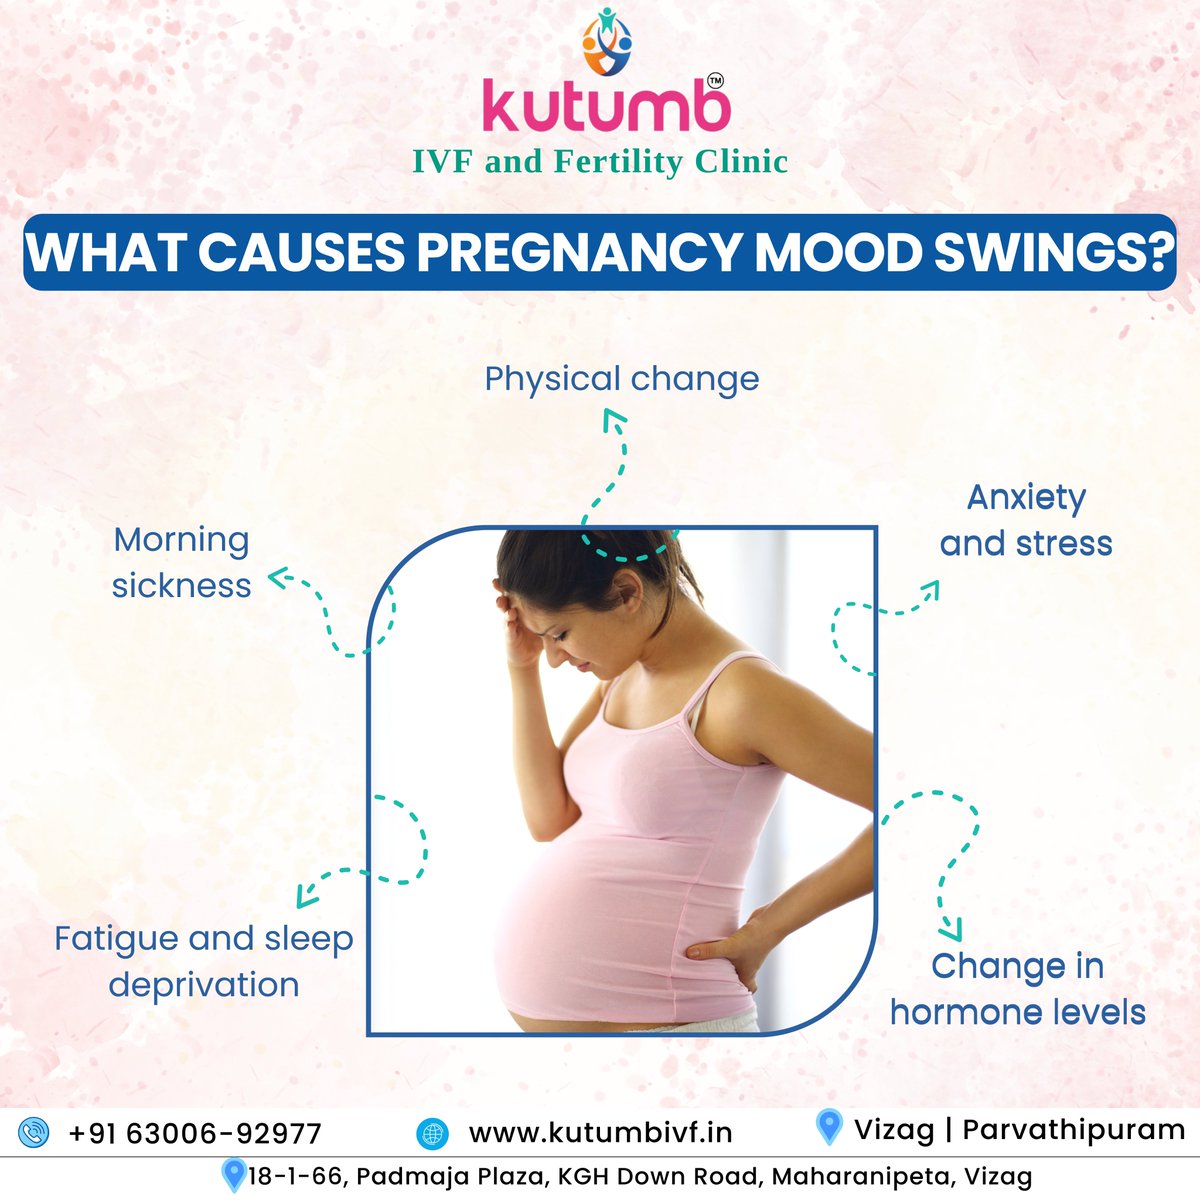 Pregnancy mood swings are common, but understanding their causes can help. Contact our expert now: +91 6300692977 #morningsickness #moodswings #pregnancymoodswings #pregnancy #parenthood #ivf #ivfcost #testtubebaby #testtubebabycentre #ivftreatment #ivftreatmentprocess #ivfclinic